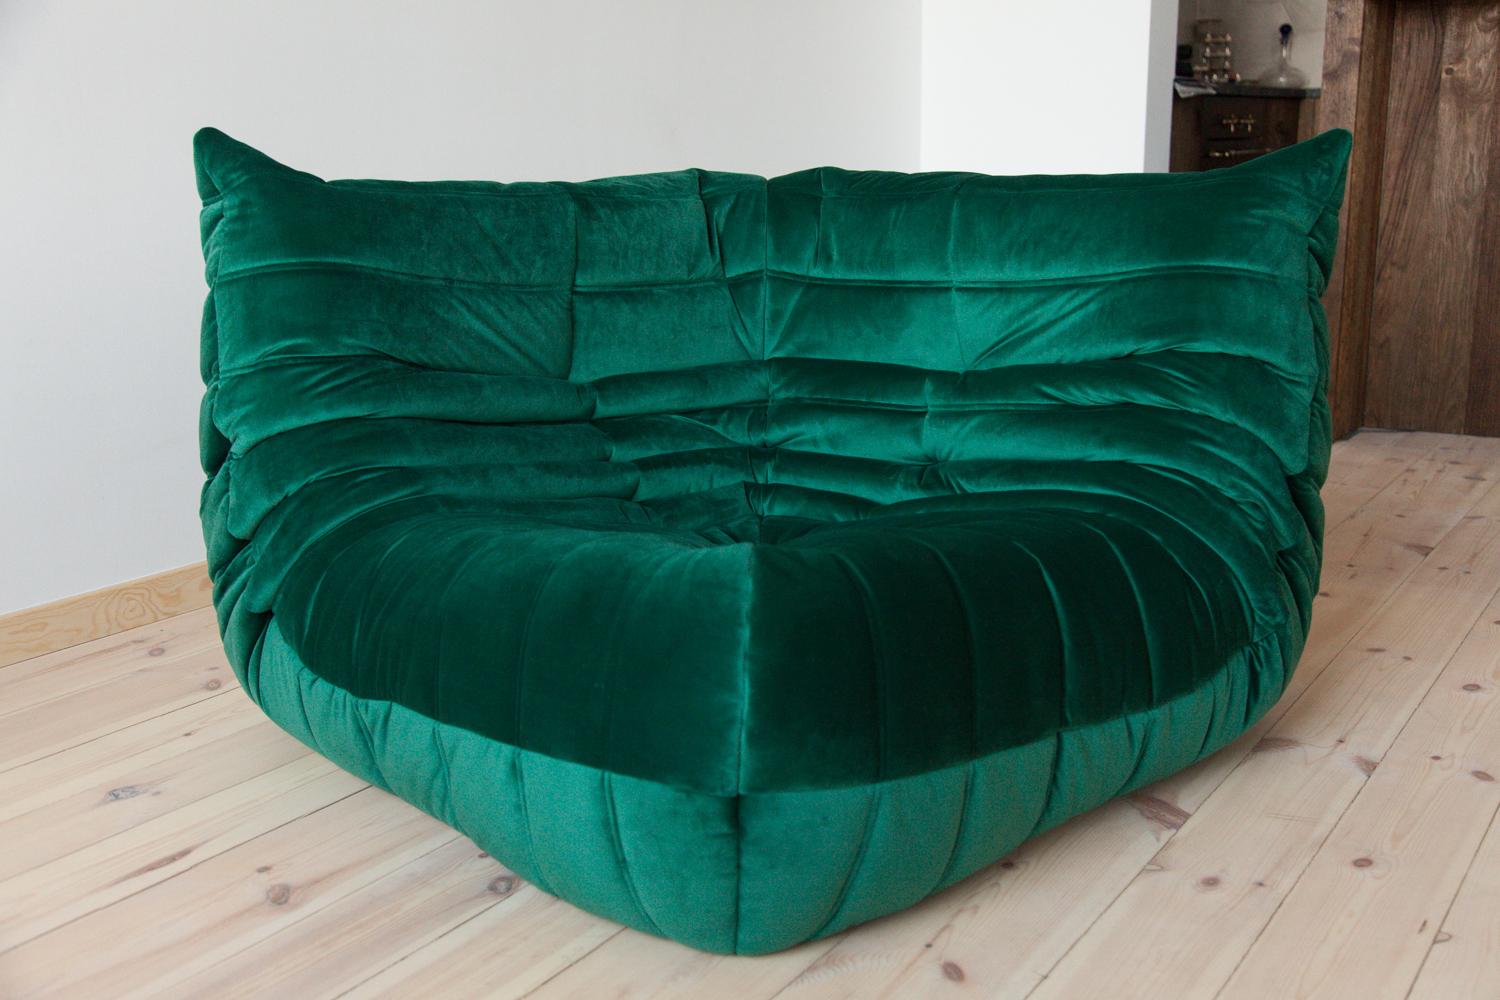 This Togo corner couch was designed by Michel Ducaroy in 1973 and was manufactured by Ligne Roset in France. It has been reupholstered in new bottle green velvet (102 x 102 x 70 cm). It has the original Ligne Roset logo and genuine Ligne Roset